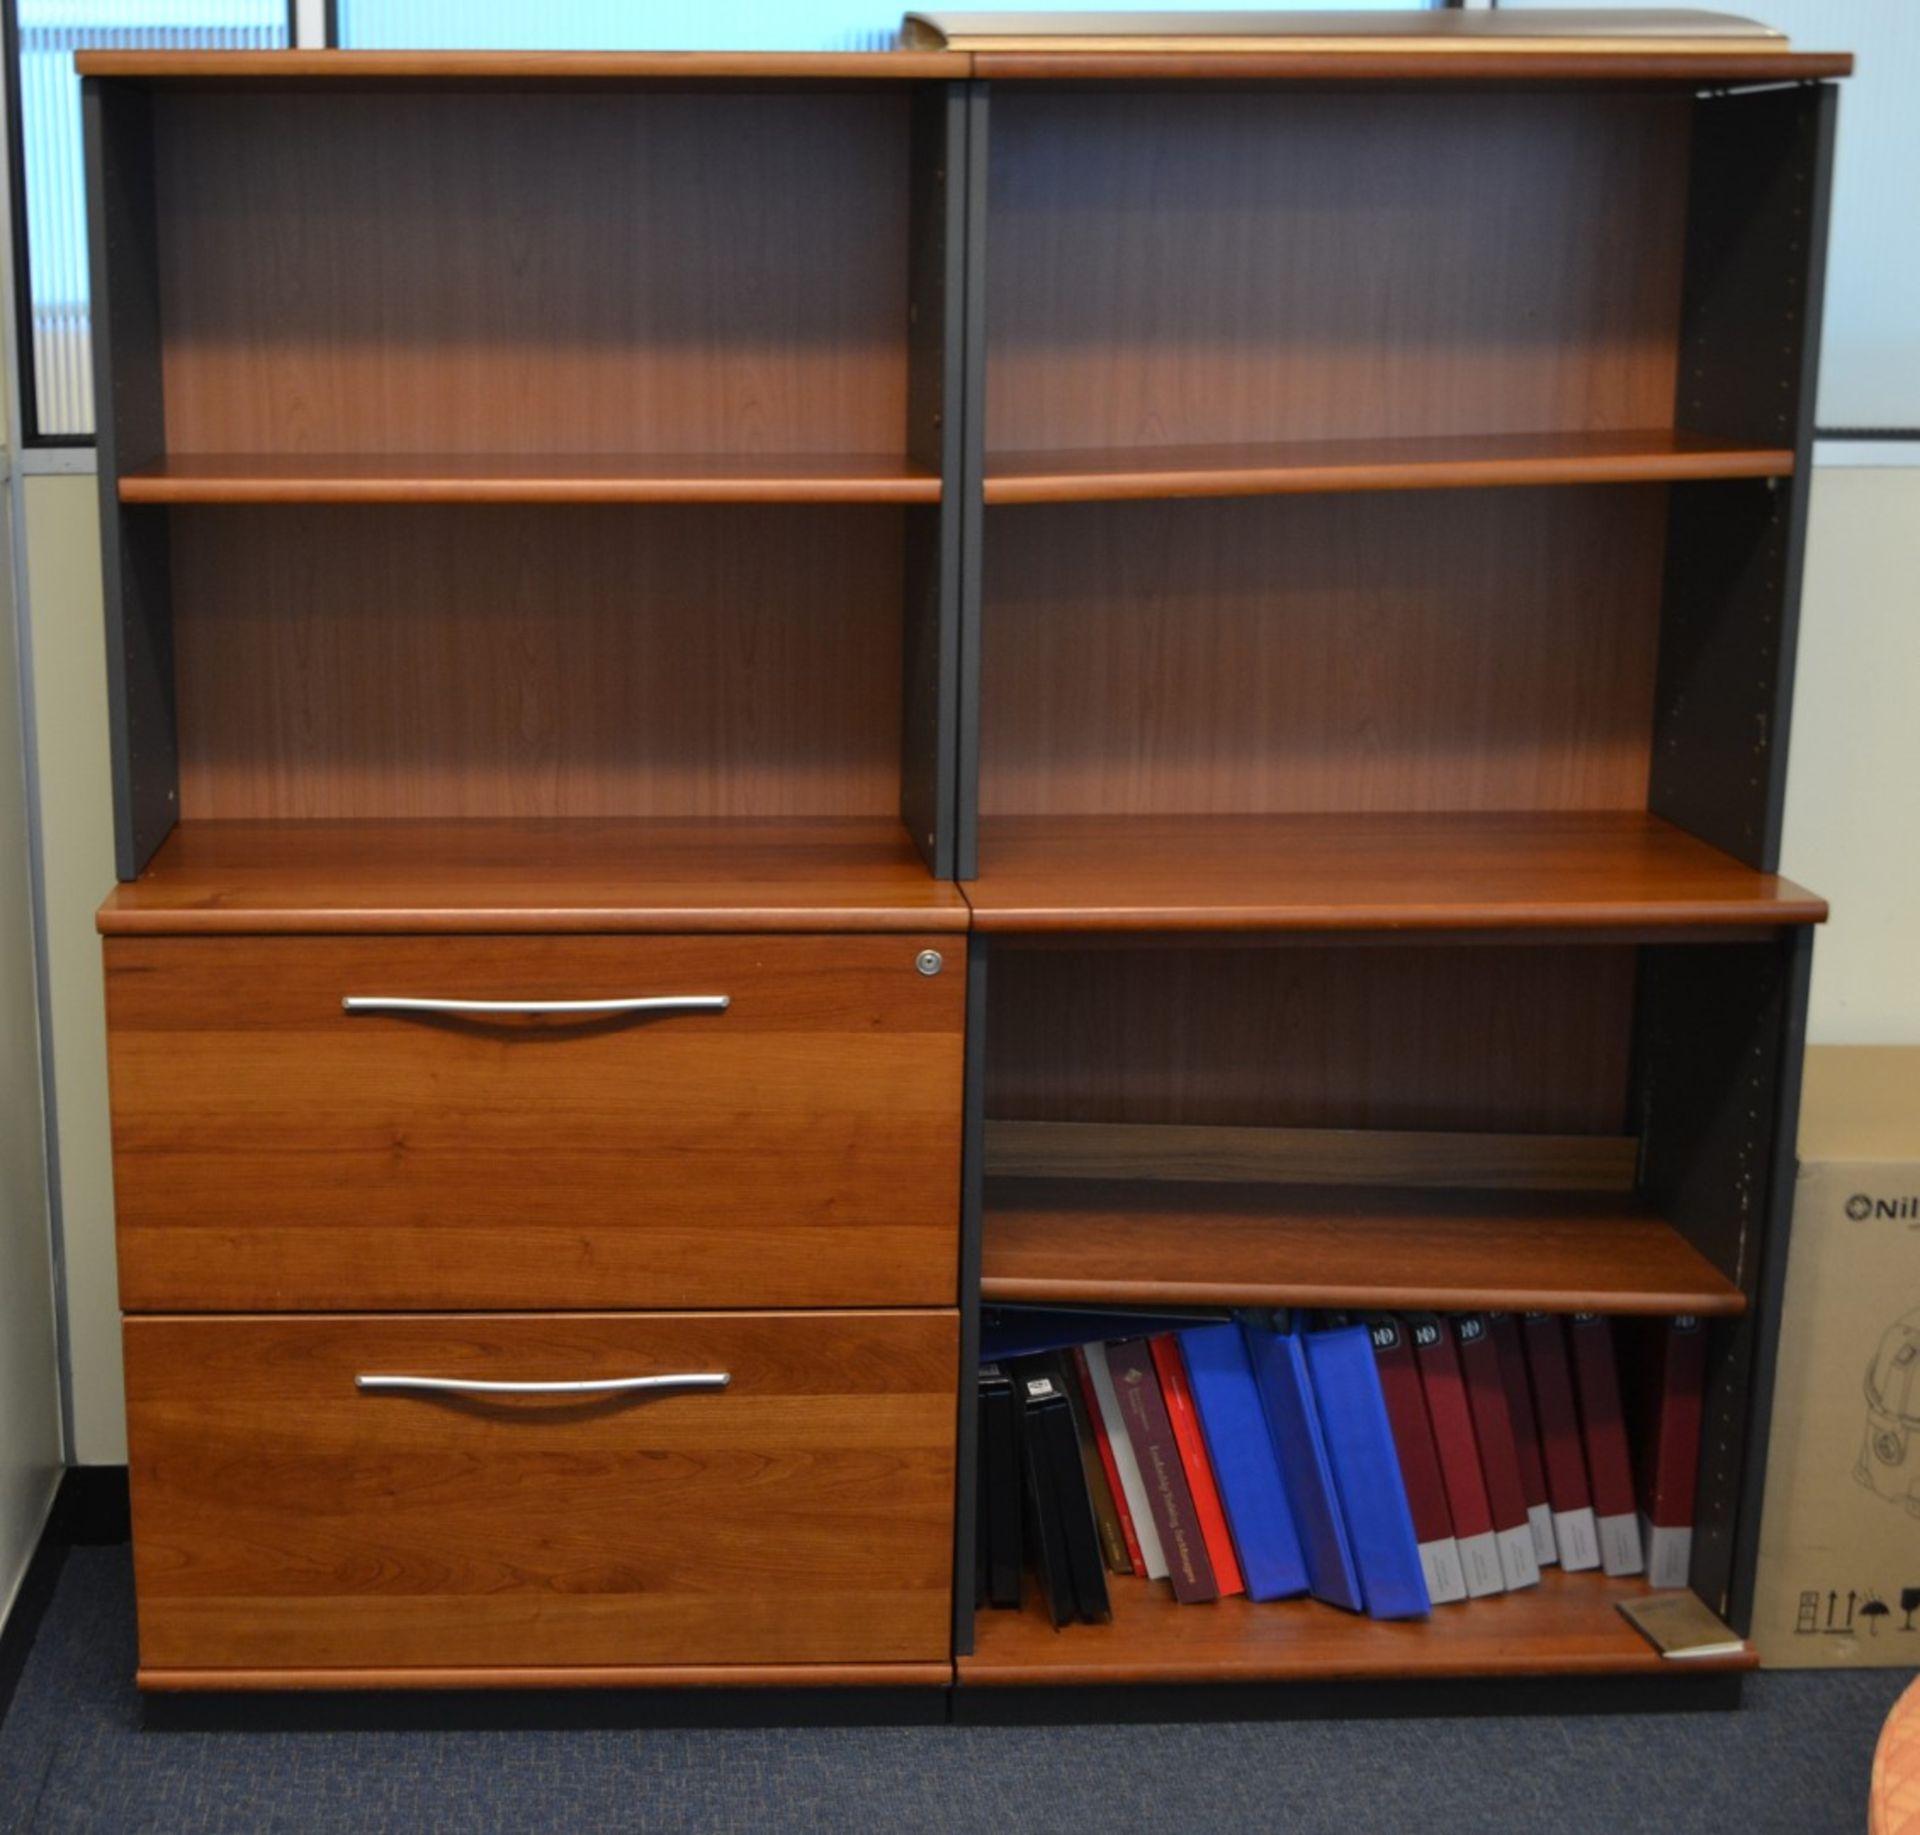 3 x Cabinets Finished In Walnut - VM339/A29 B1 - CL409 - Location: Wakefield WF16 This Lot